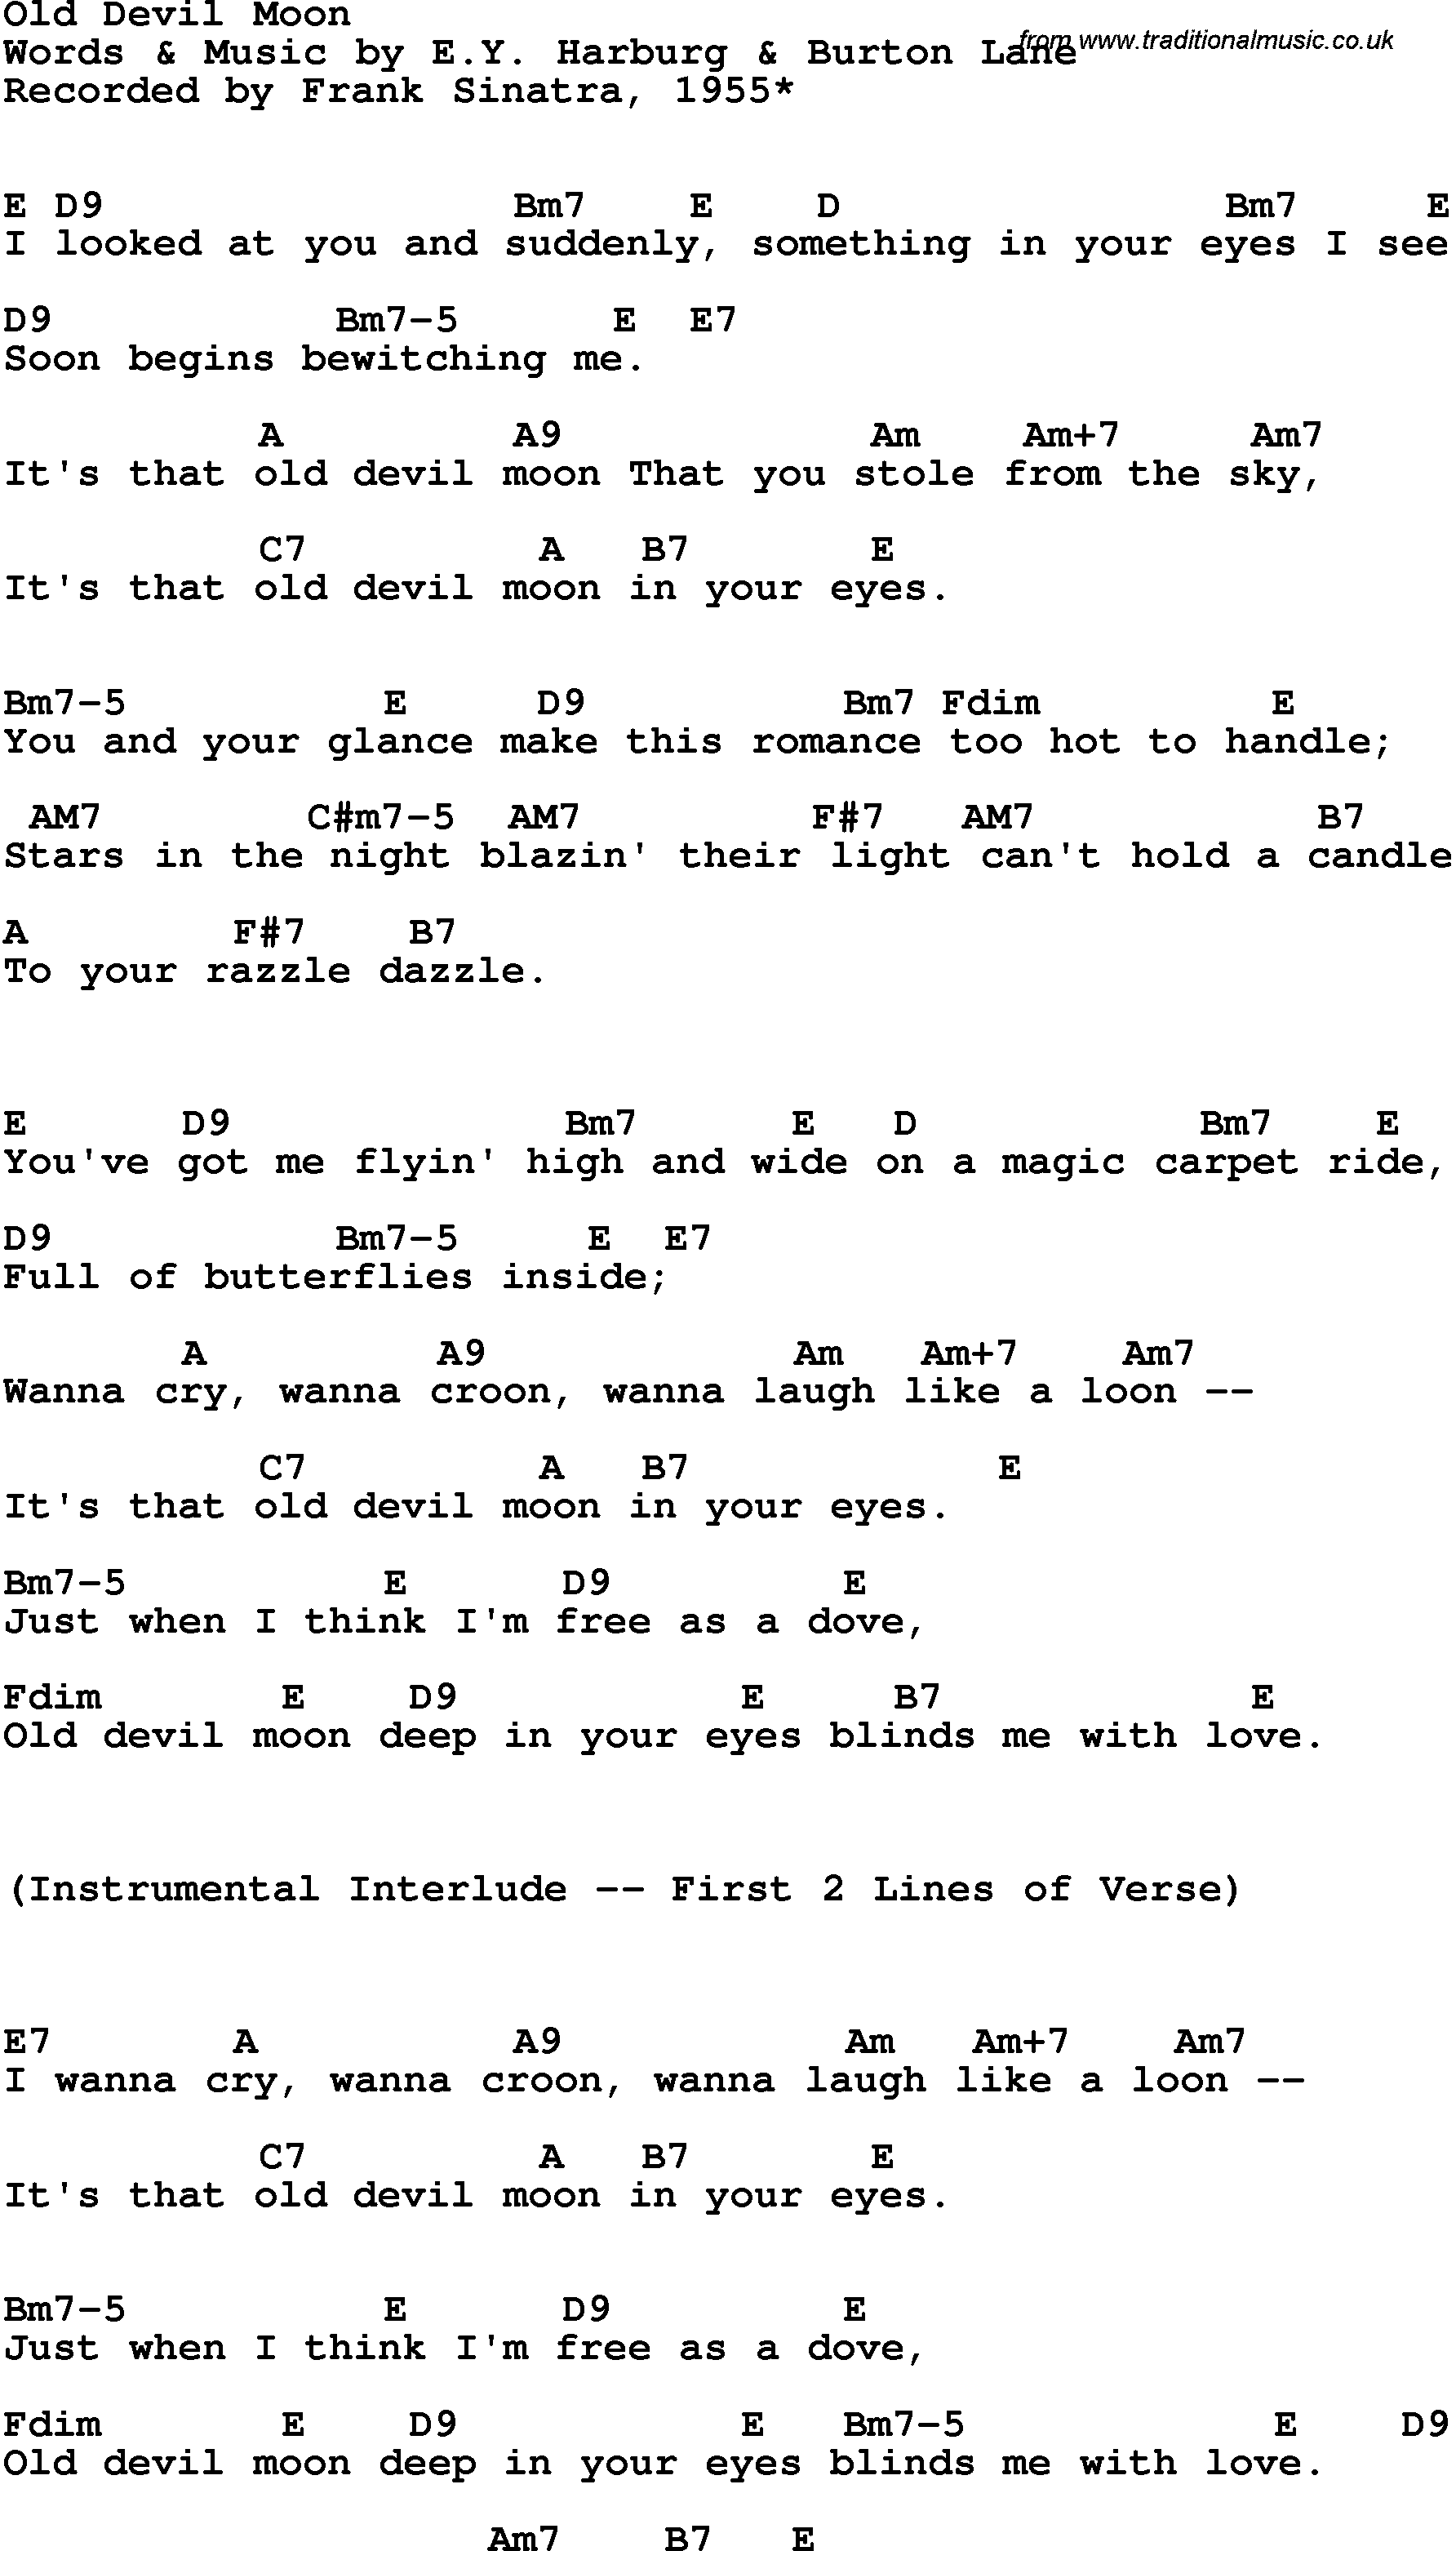 Song Lyrics with guitar chords for Old Devil Moon - Frank Sinatra, 1955